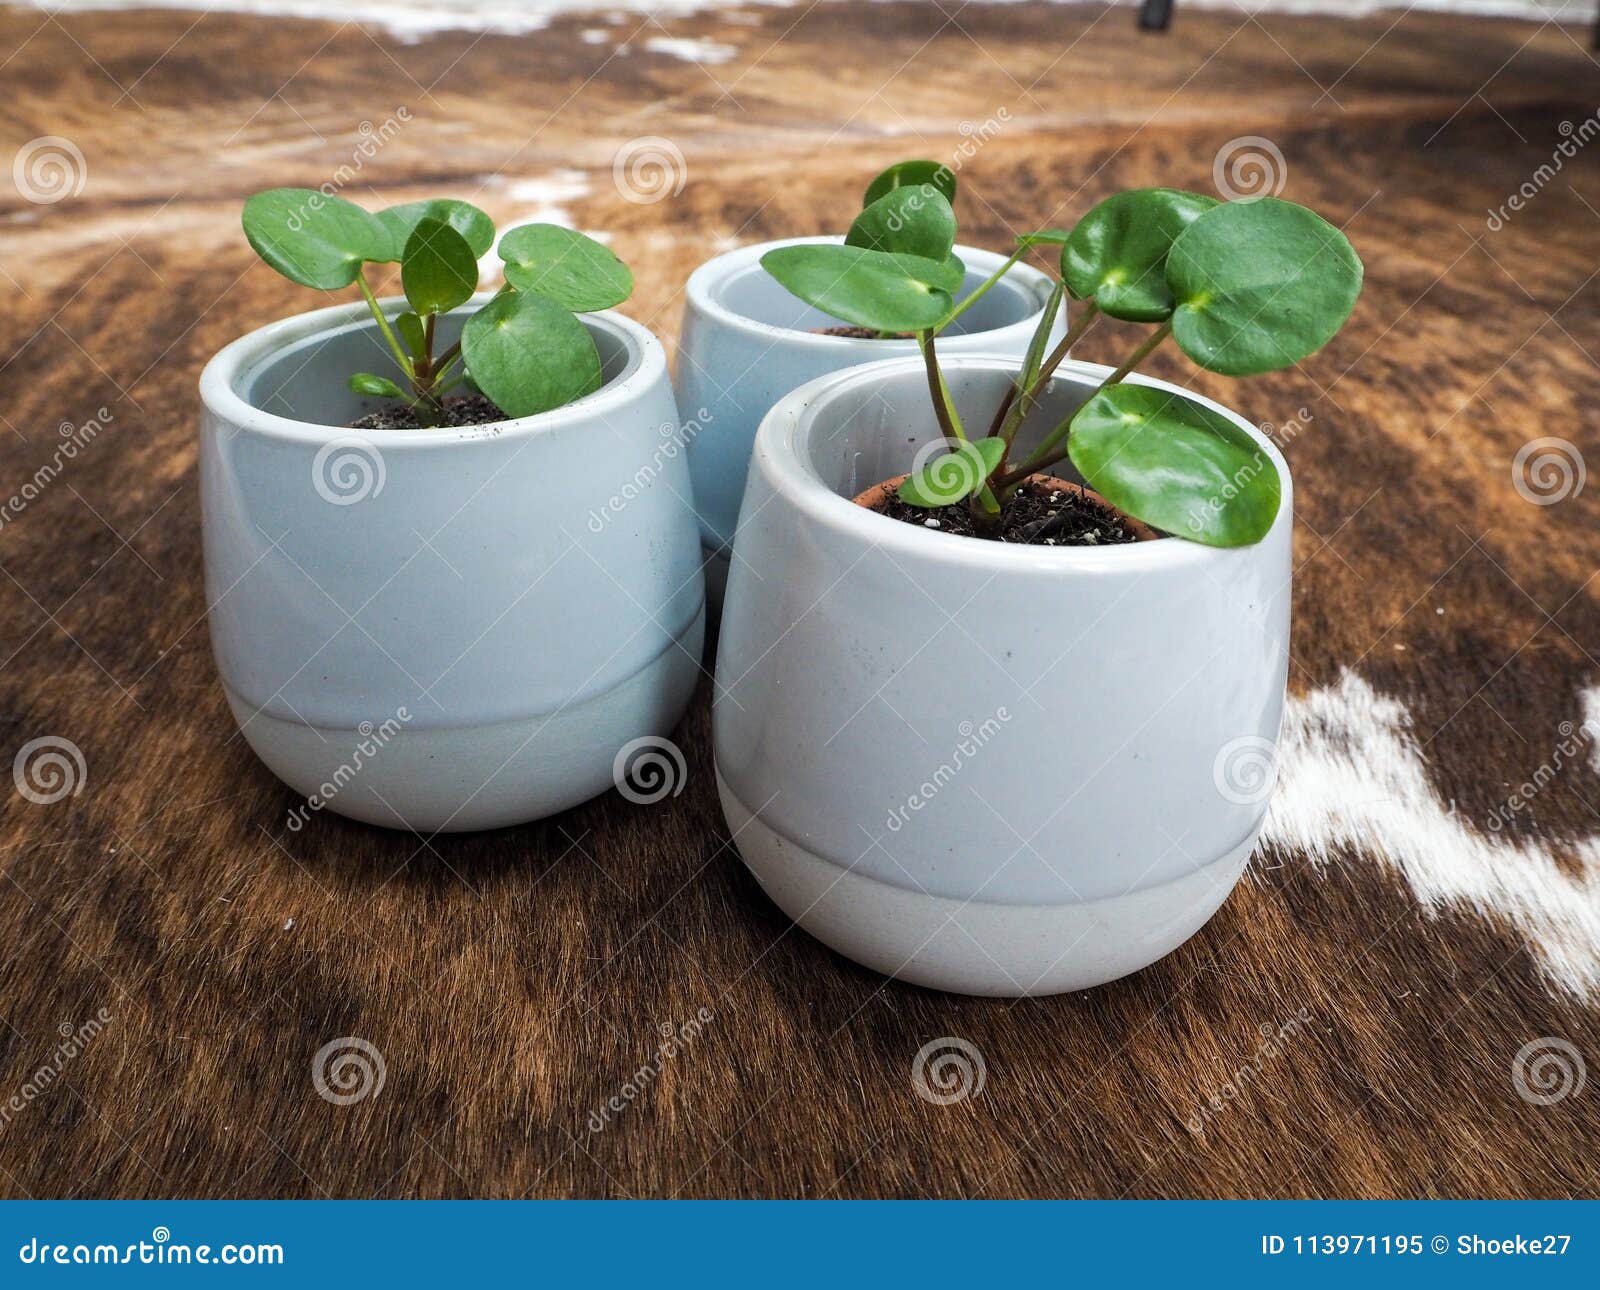 three baby pilea peperomioides or pancake plant urticaceae on